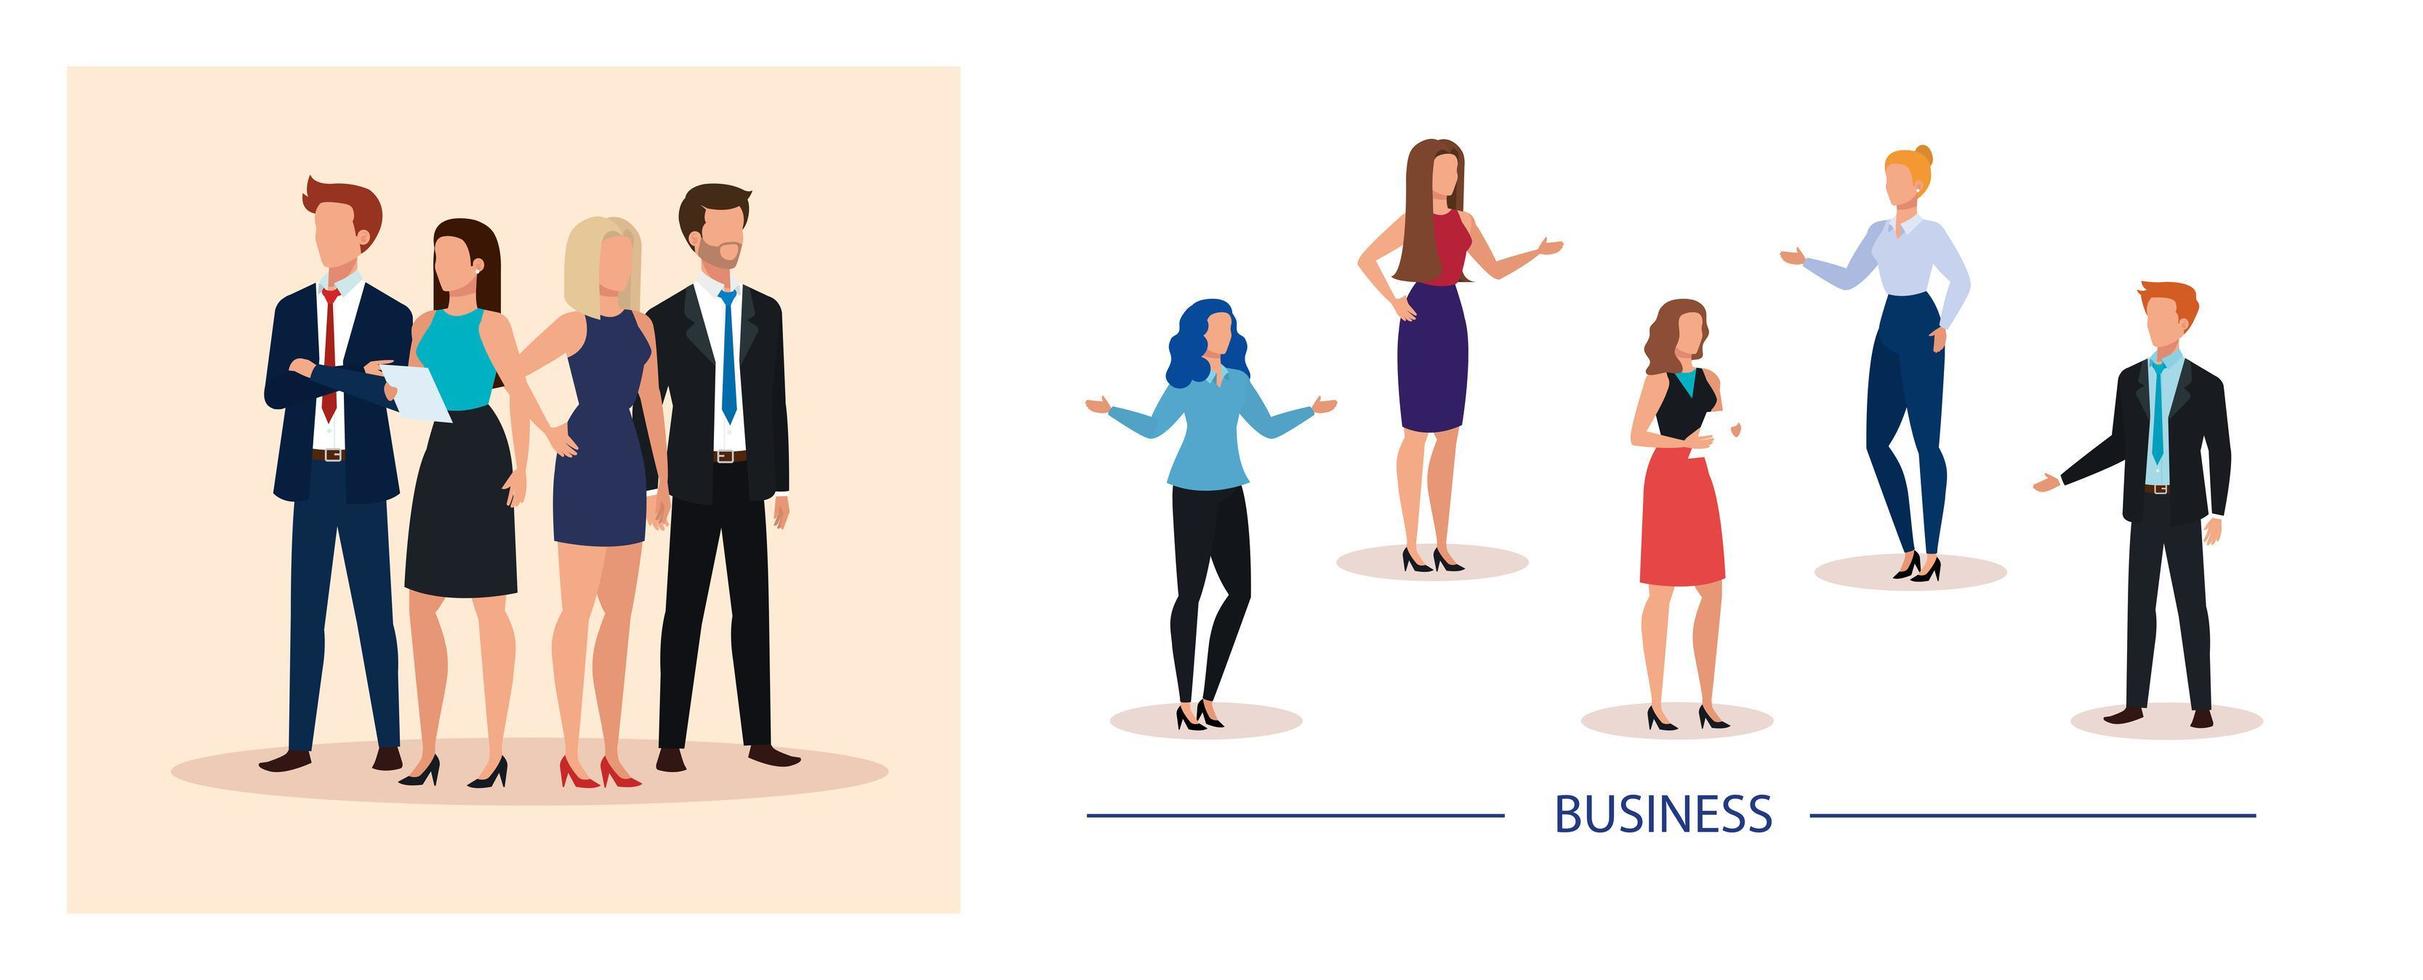 meeting of business people avatar character vector